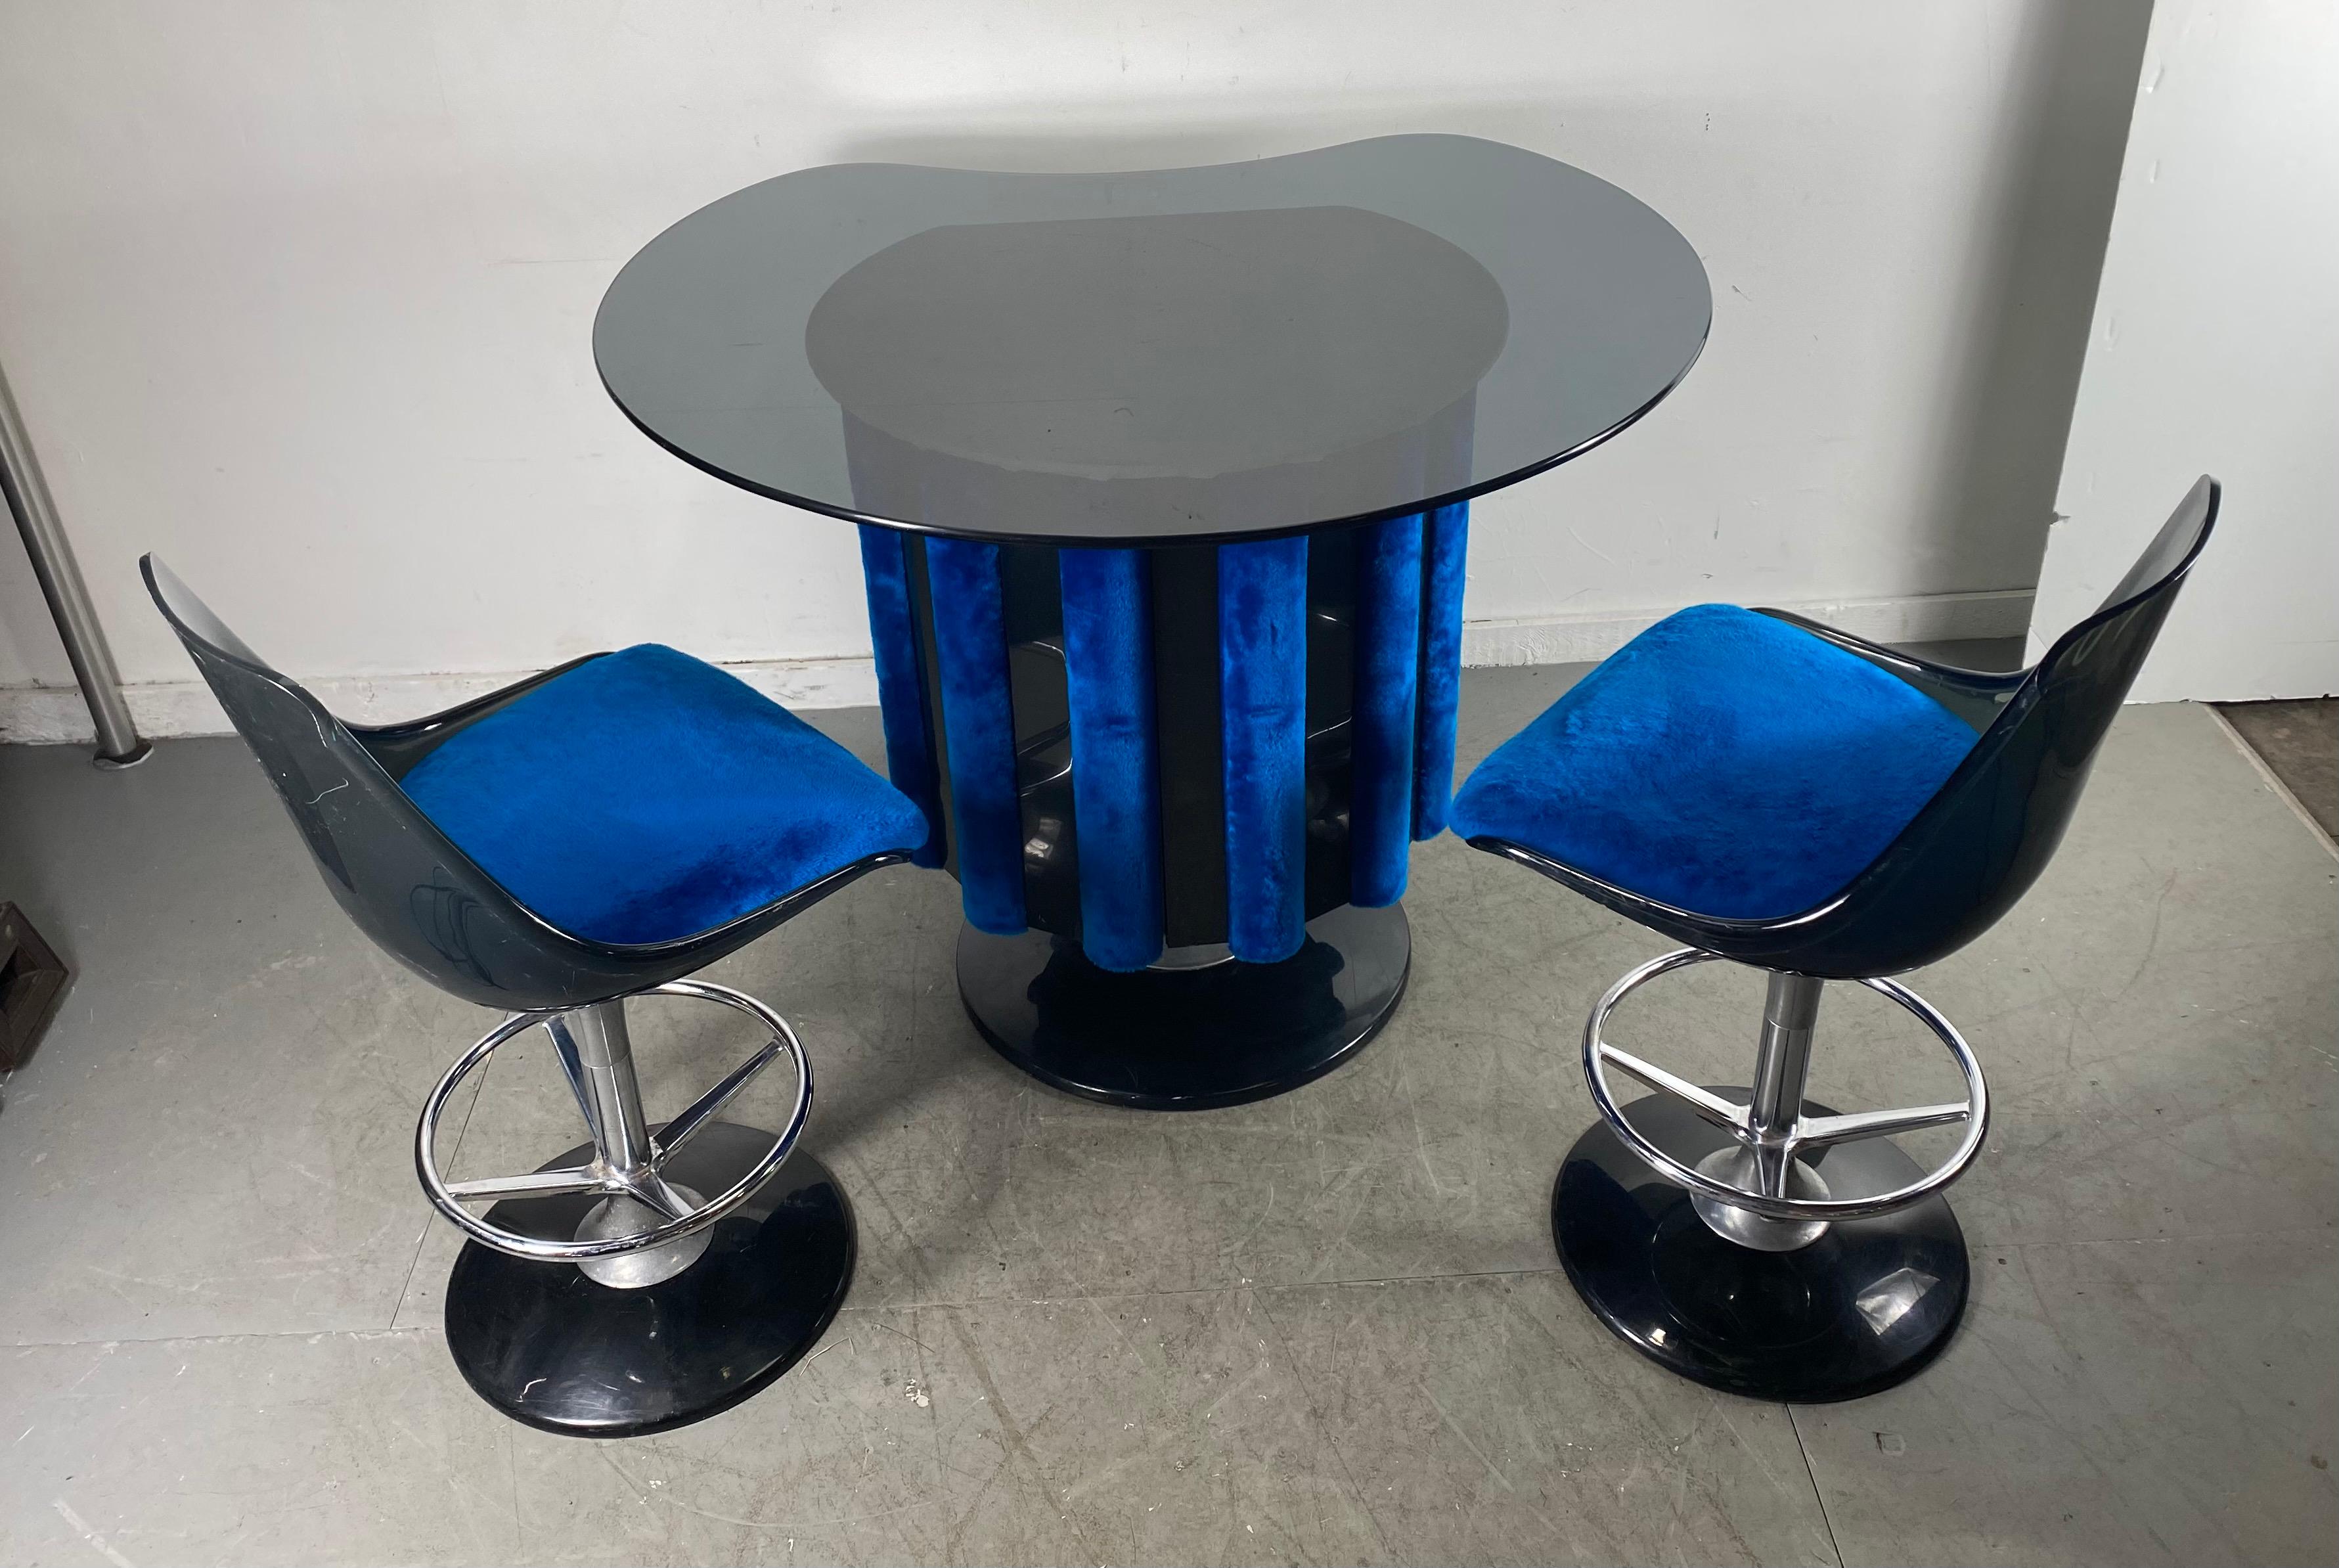 Fabric 1970s Space Age Three-Piece Pedestal Dry Bar with Two Stools by Chrome Craft